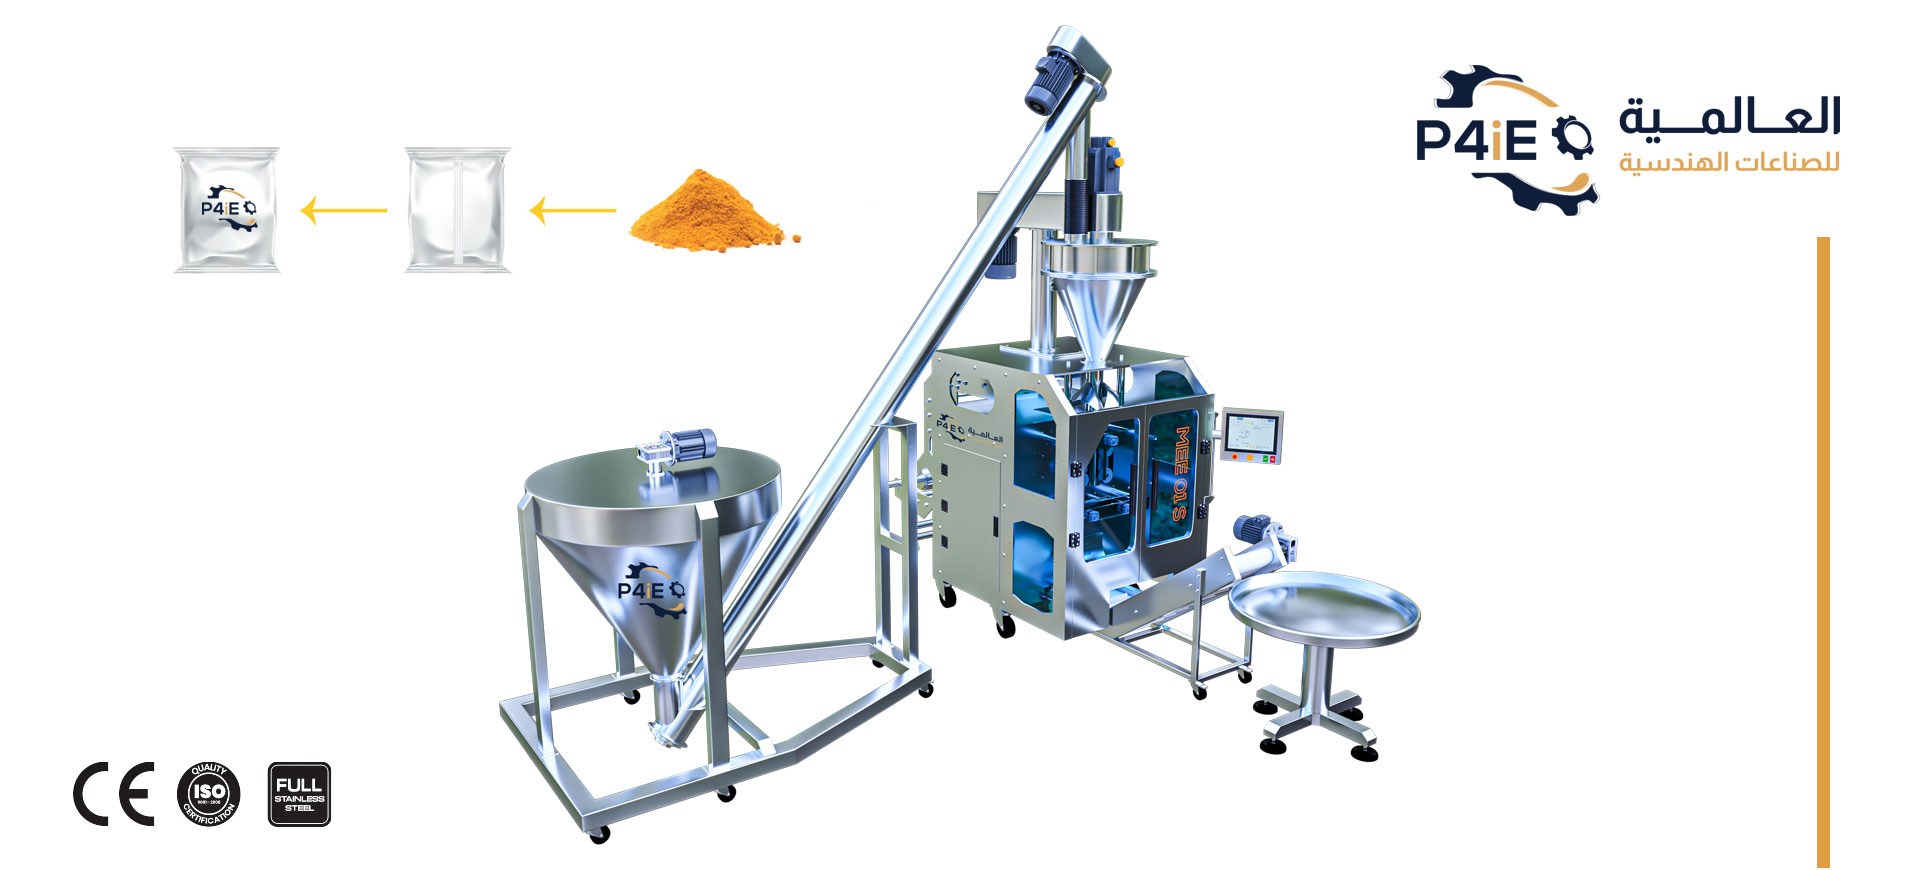 FILLING AND PACKAGING MACHINE With spiral conveyor | ME - 01 - S